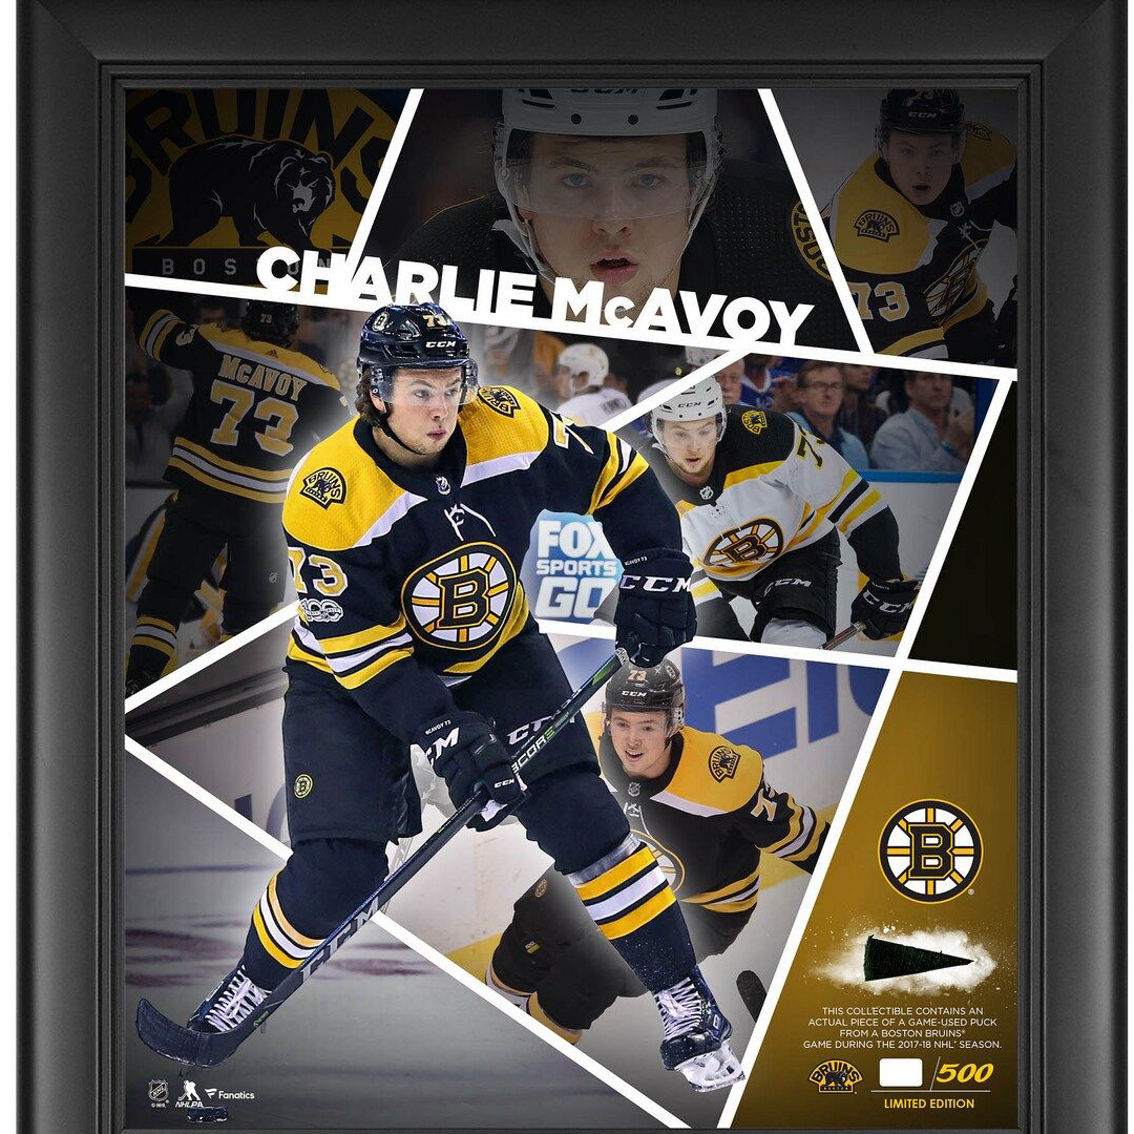 Fanatics Authentic Charlie McAvoy Boston Bruins Framed 15'' x 17'' Impact Player Collage with a Piece of Game-Used Puck - Limited Edition of 500 - Image 2 of 2